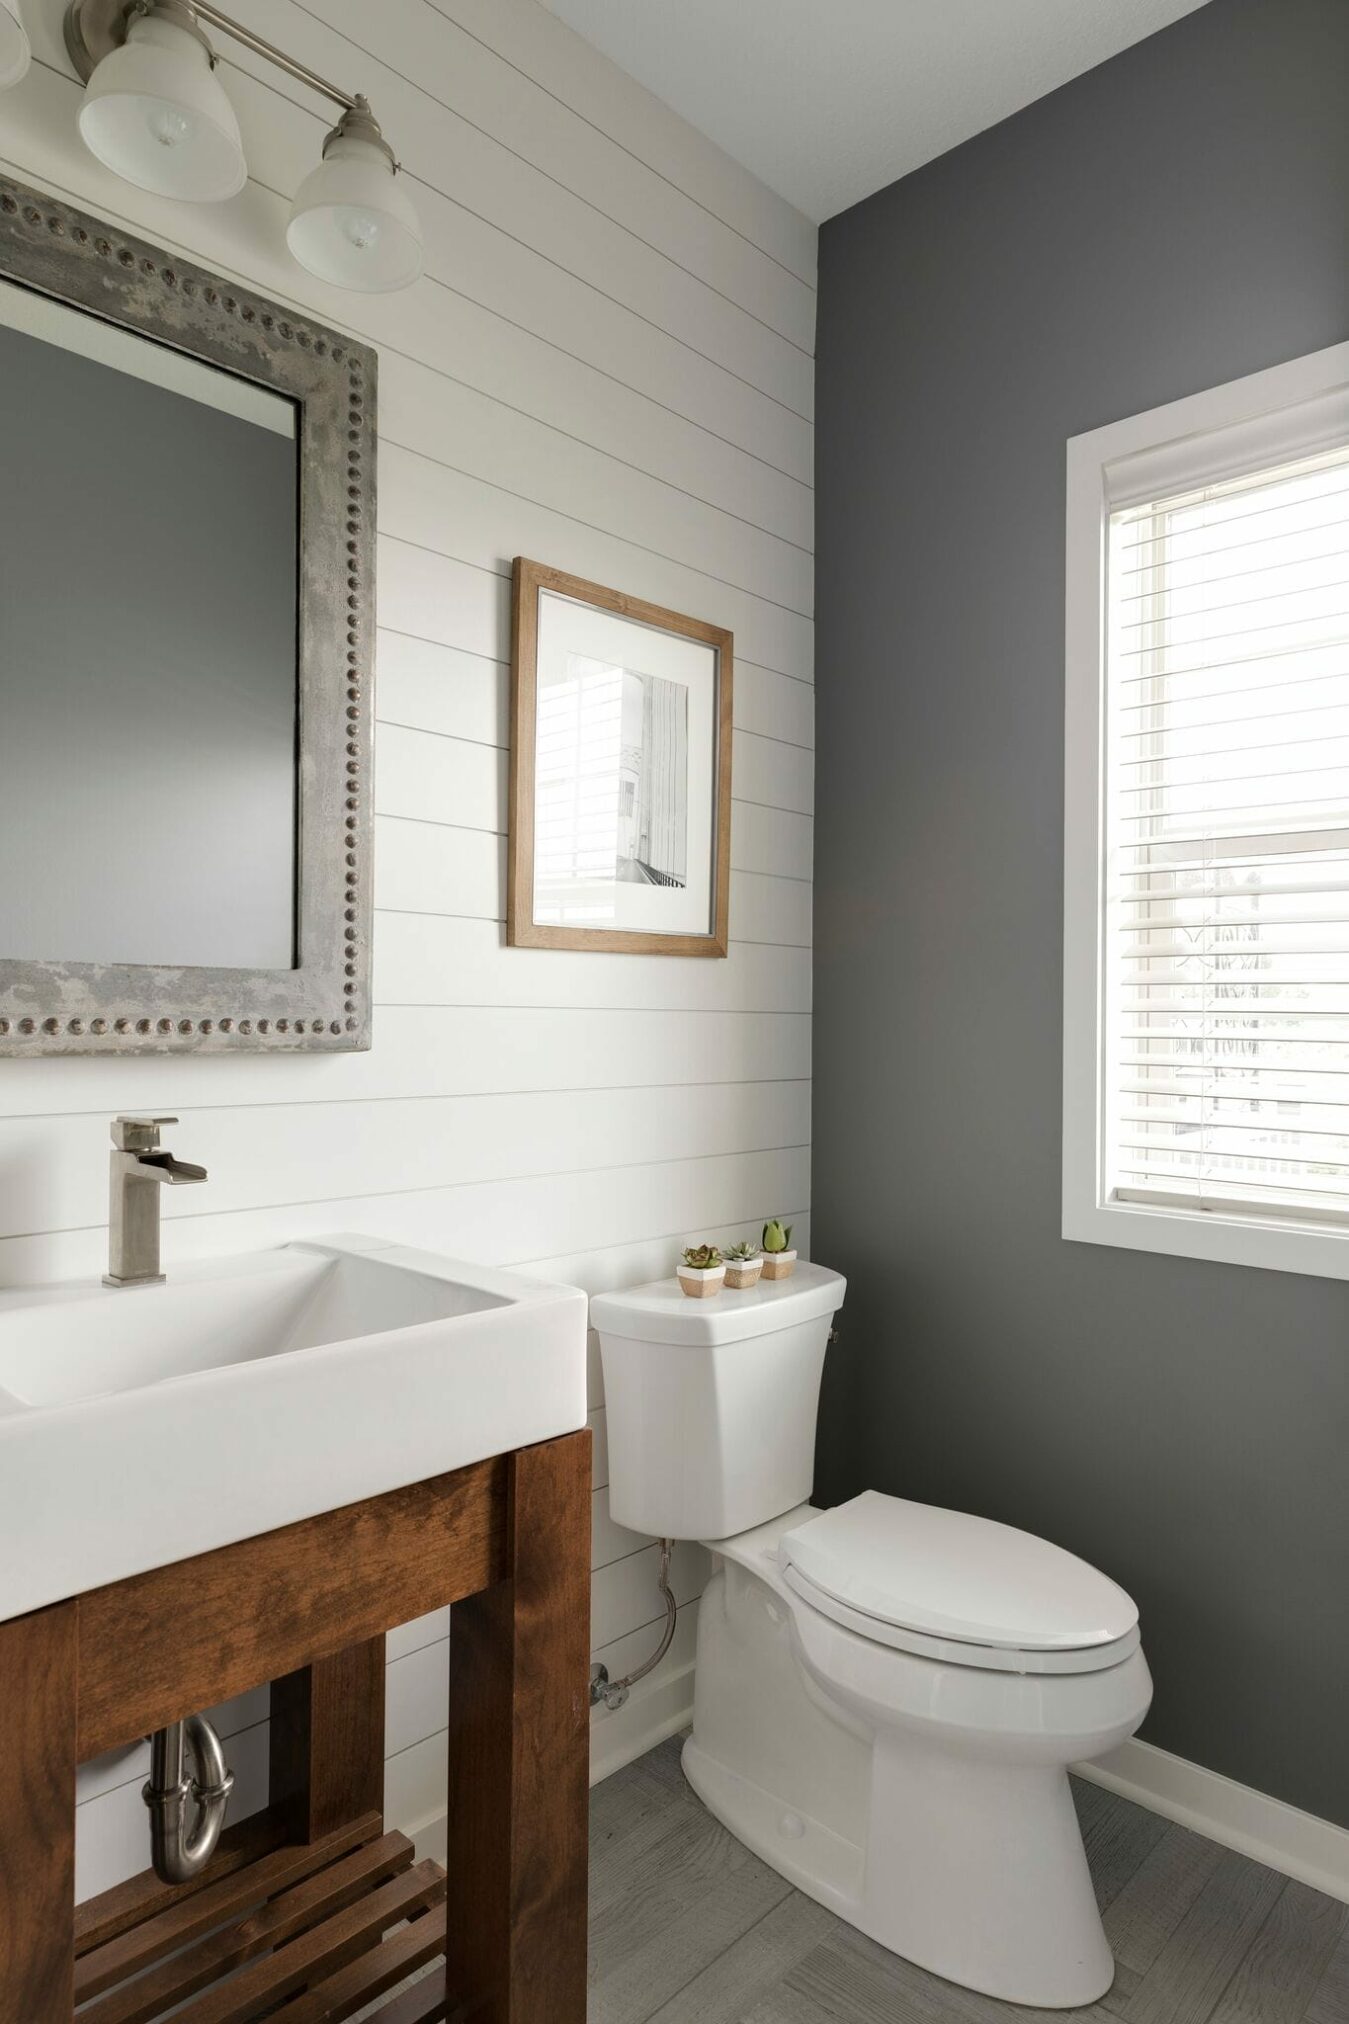 Gray and white walls in a powder room remodel, part of Parade of Homes in 2018.